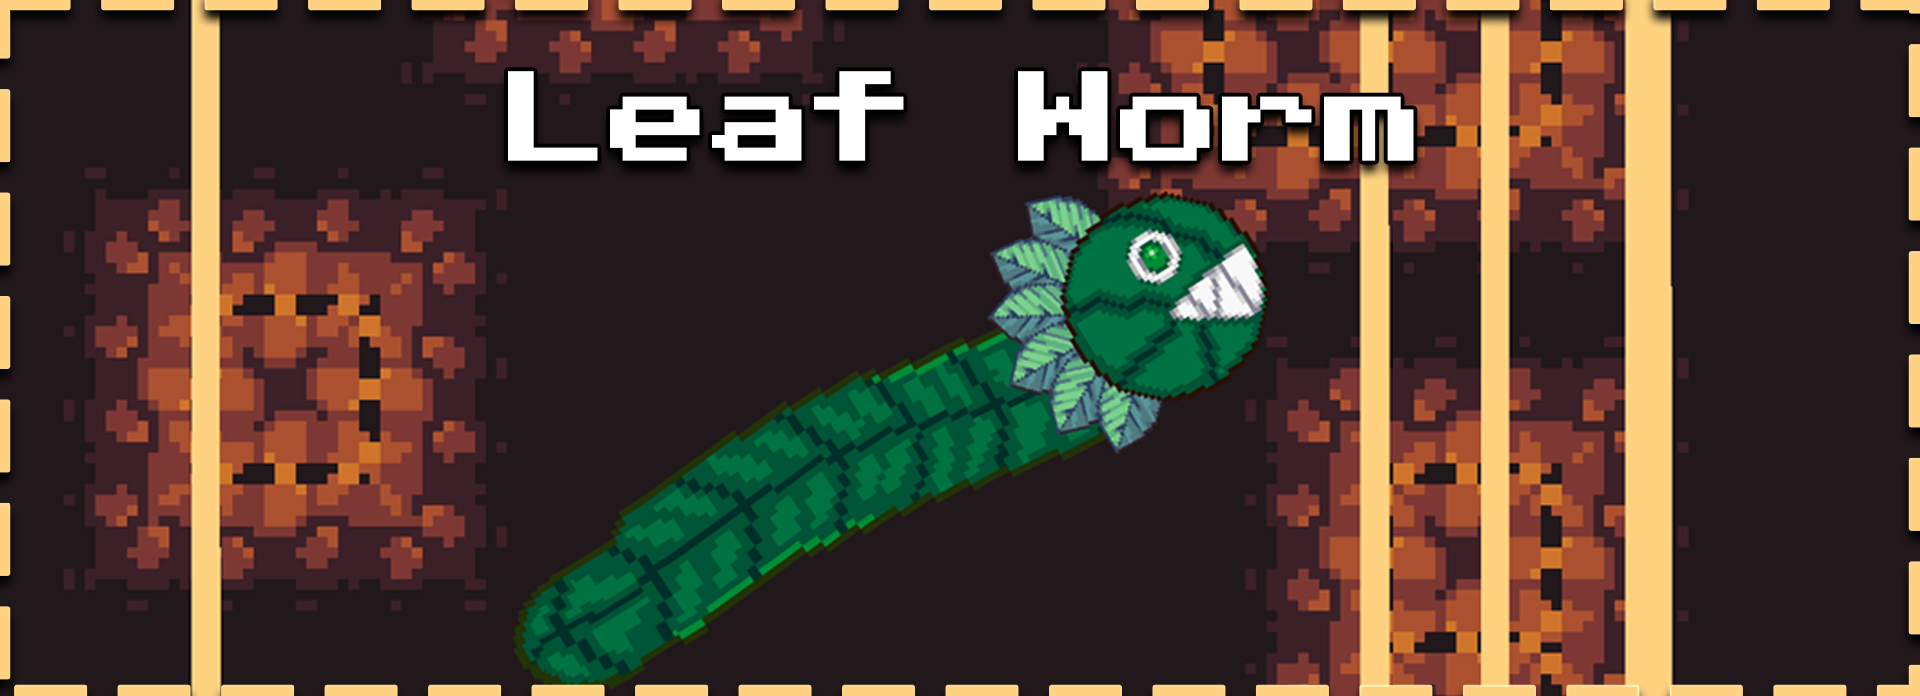 Title card for a side-scroller mini-game called Leaf Worm by Charlie Mason